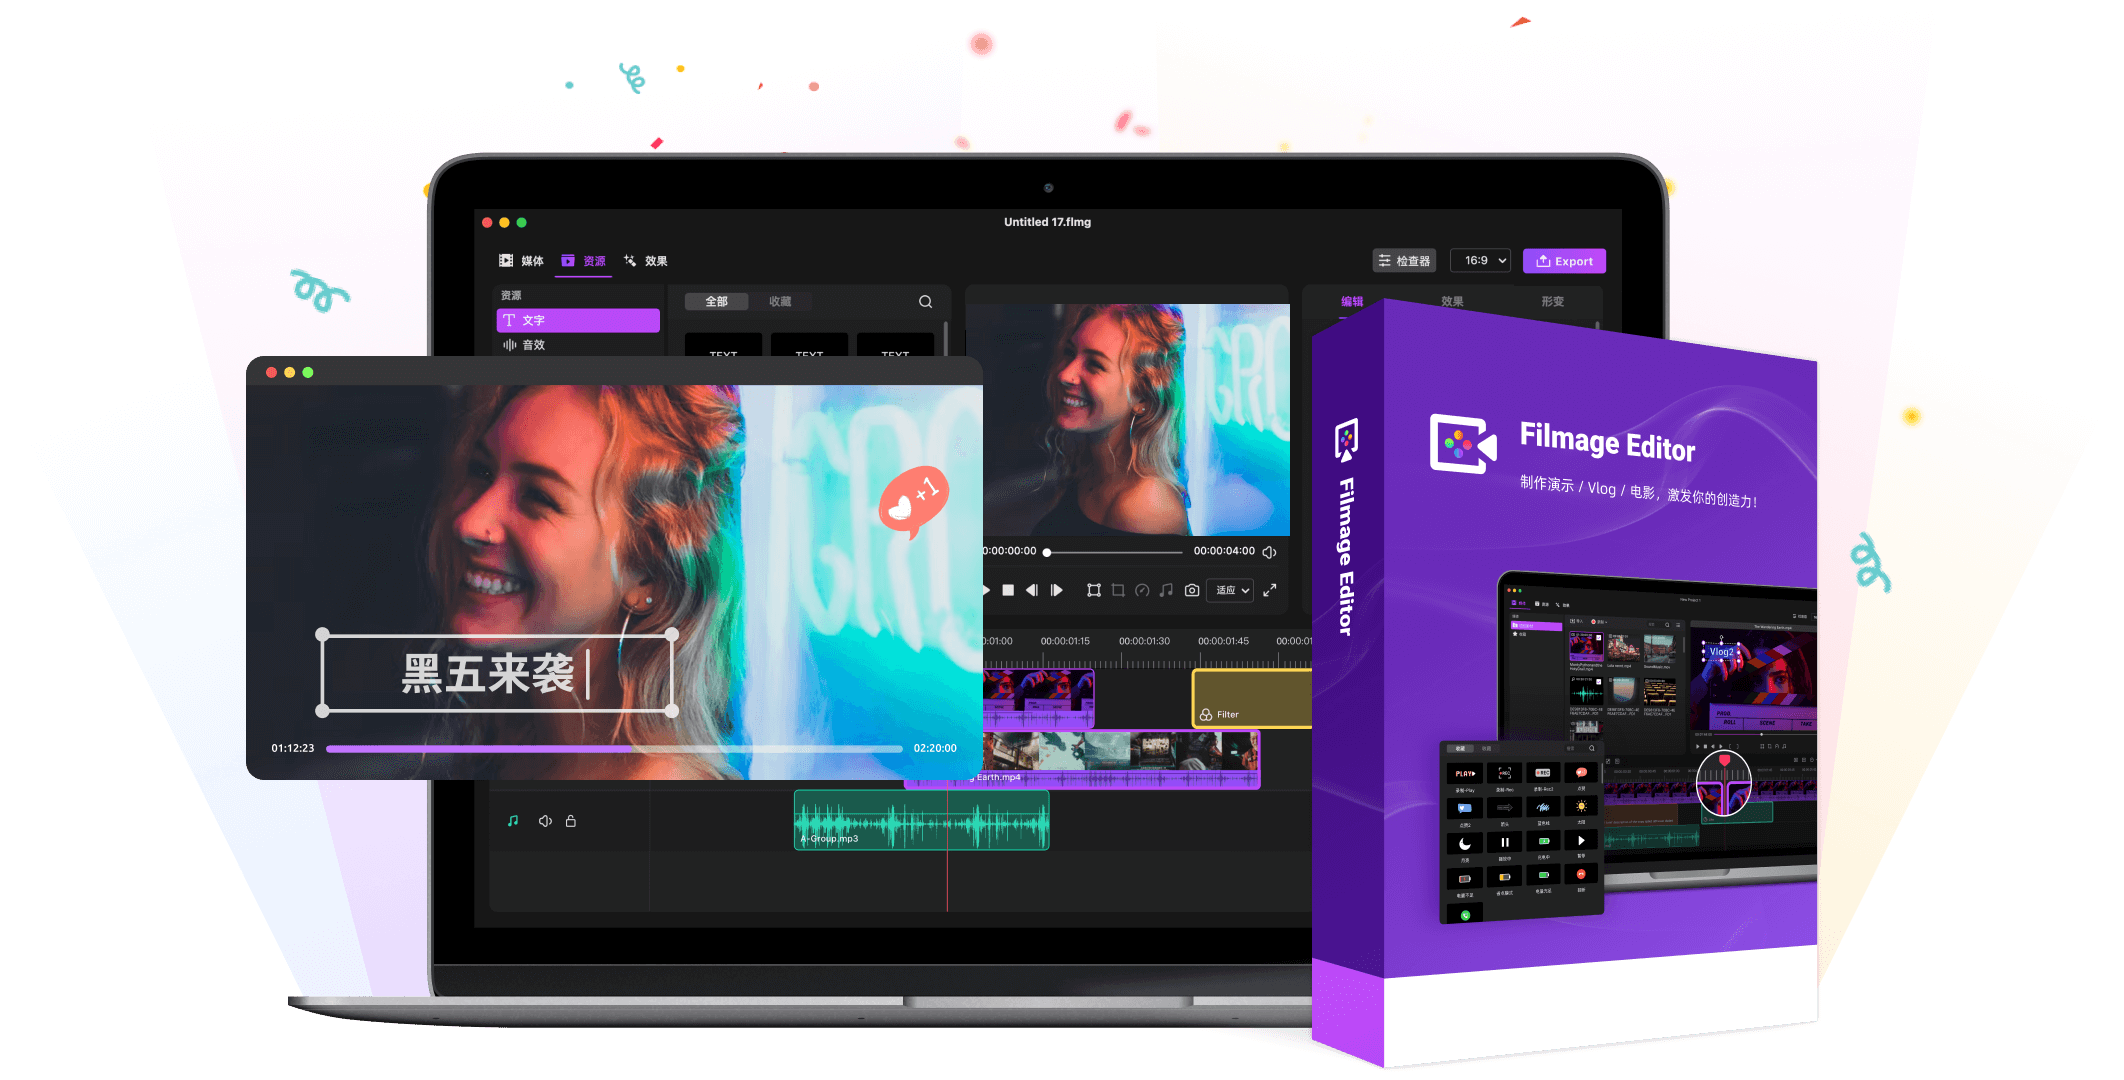 Black Friday Sale: Share and Get Filmage Editor Mac